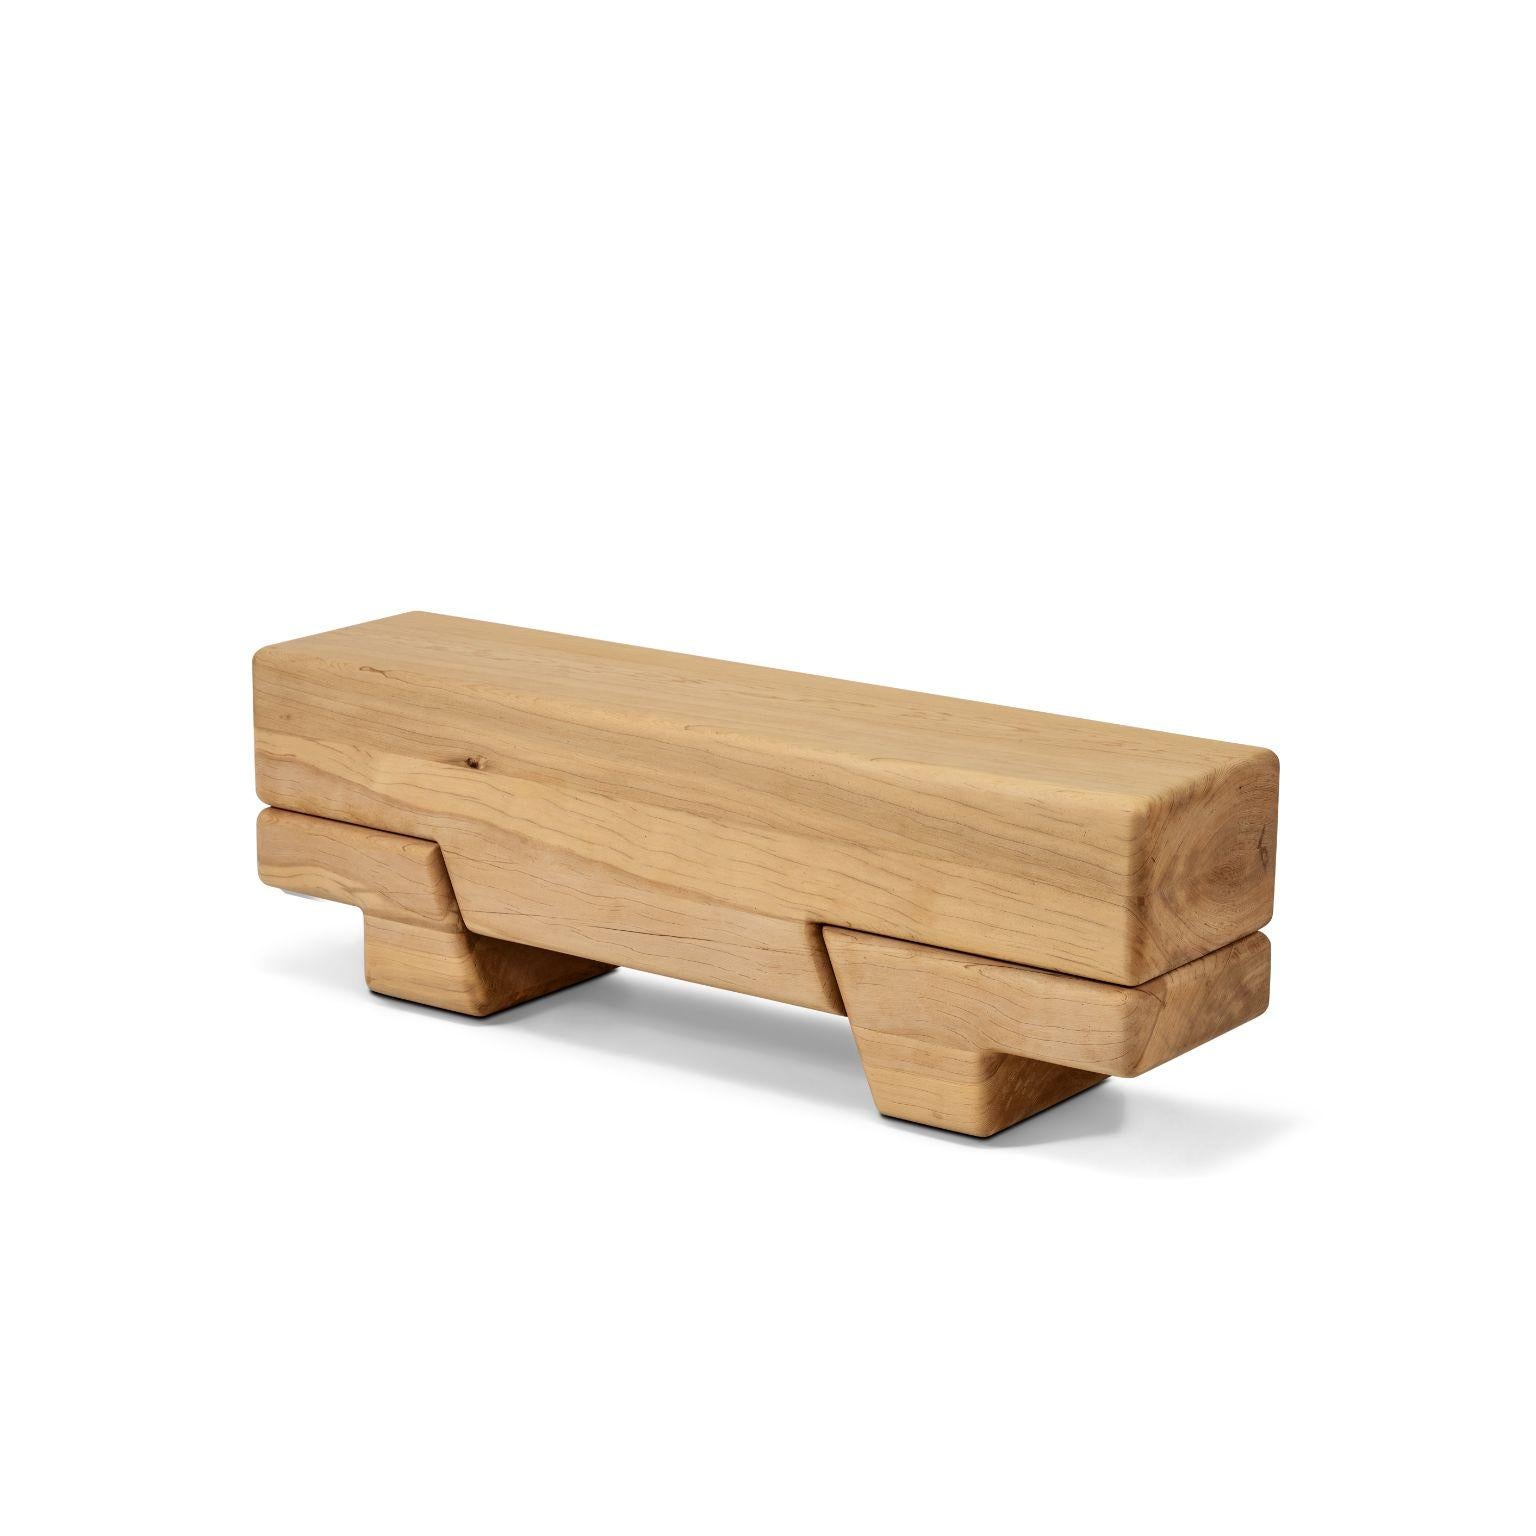 Wood Aromatique Cedre Laminated Bench by Contemporary Ecowood For Sale